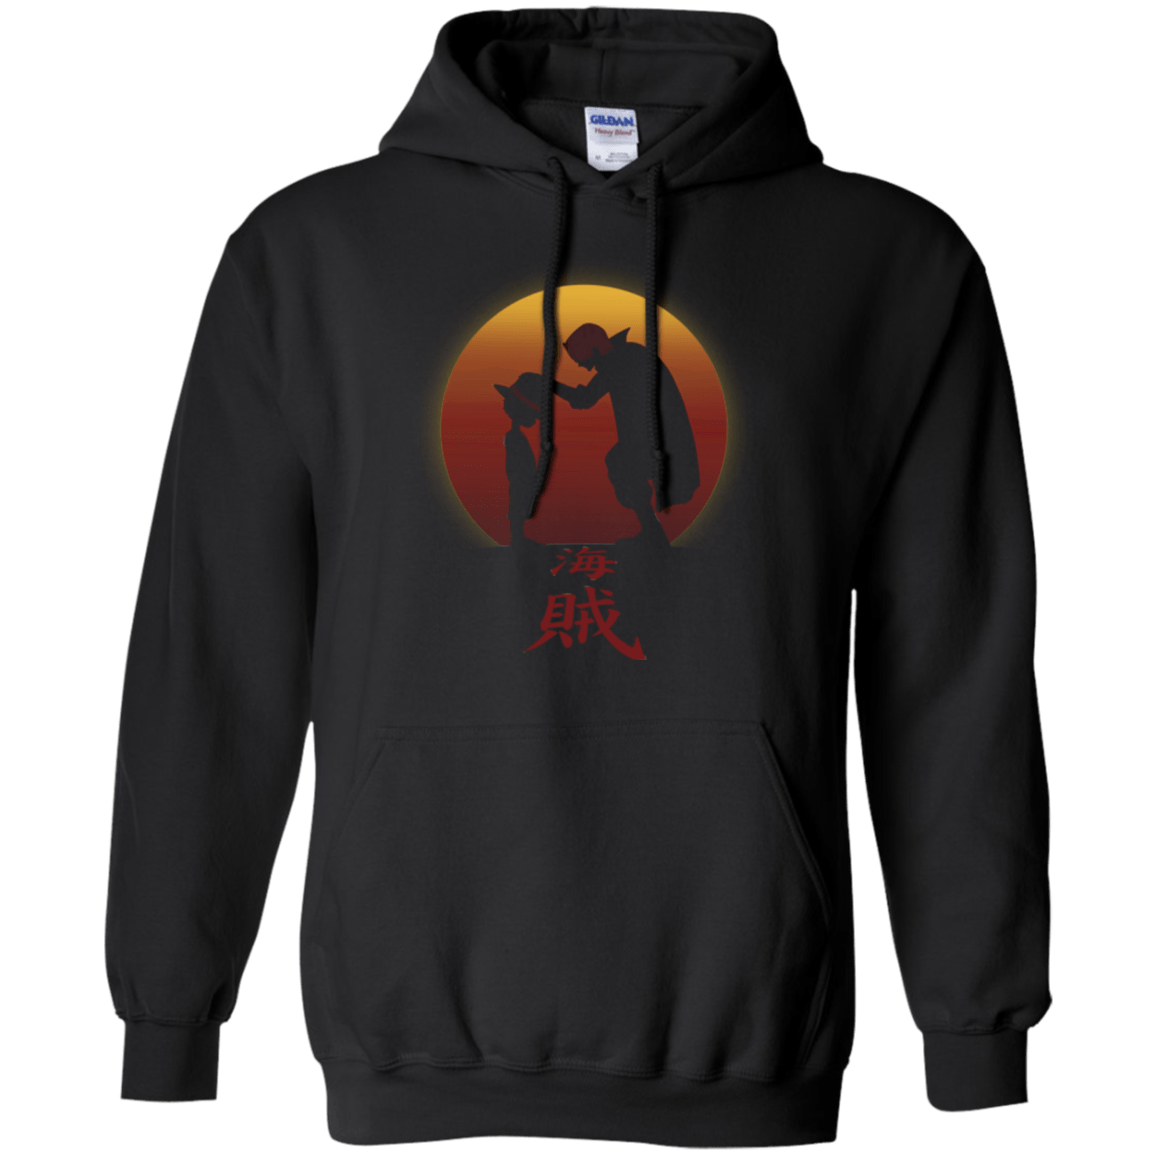 Sweatshirts Black / Small I will be the Pirate King Pullover Hoodie